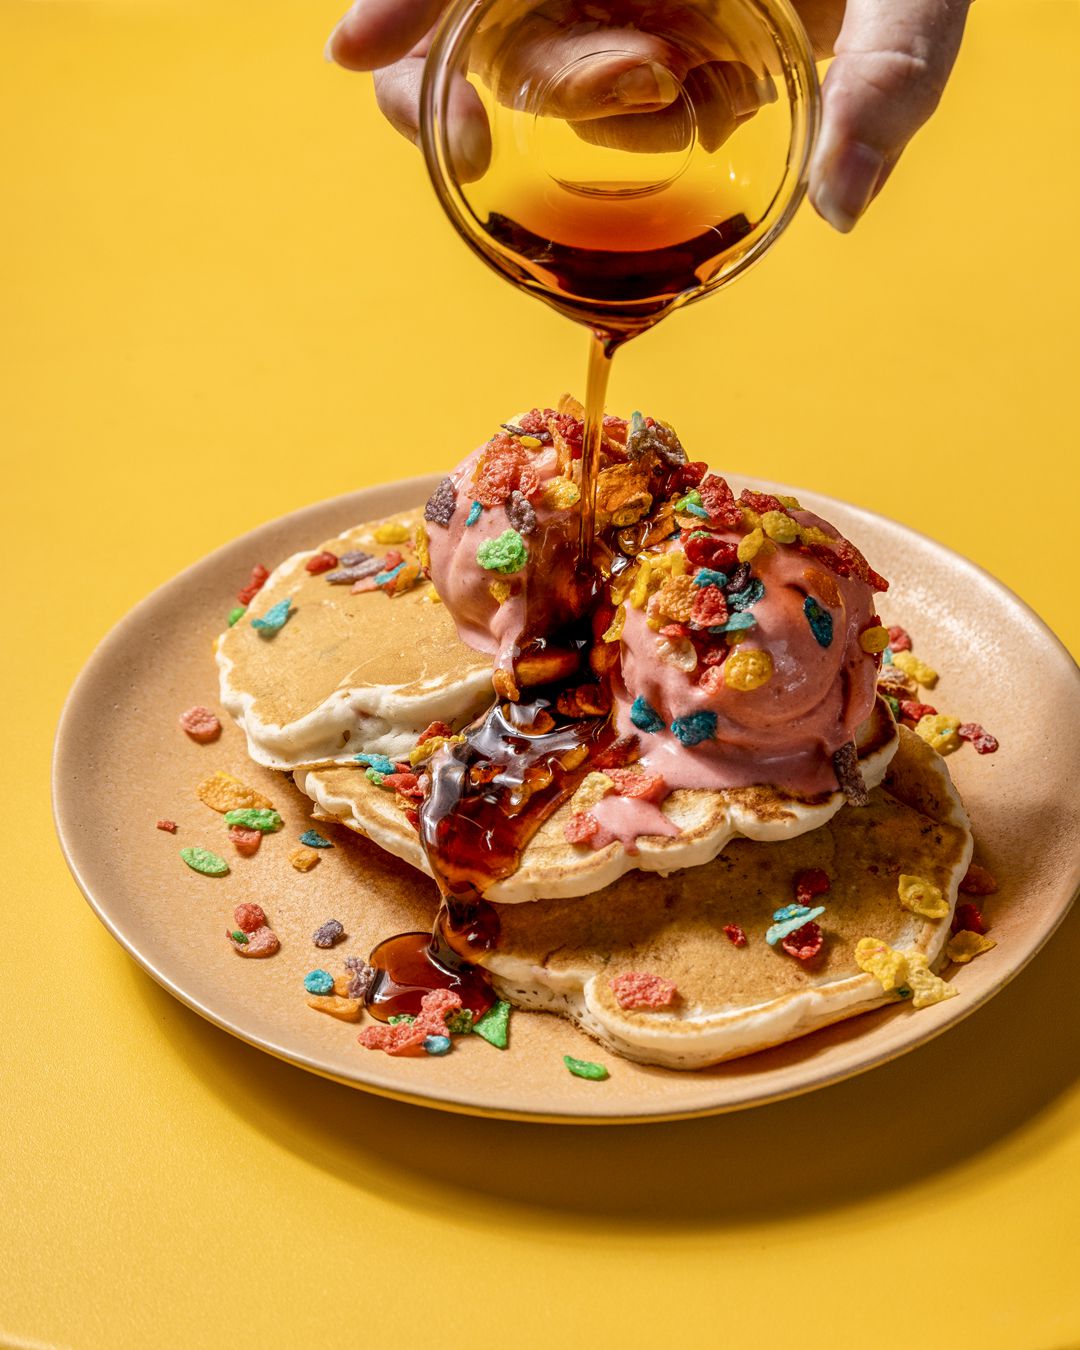 Three pancakes with cereal sprinkles, two scoops of pink ice cream, and syrup being poured from a clear glass cup by a hand